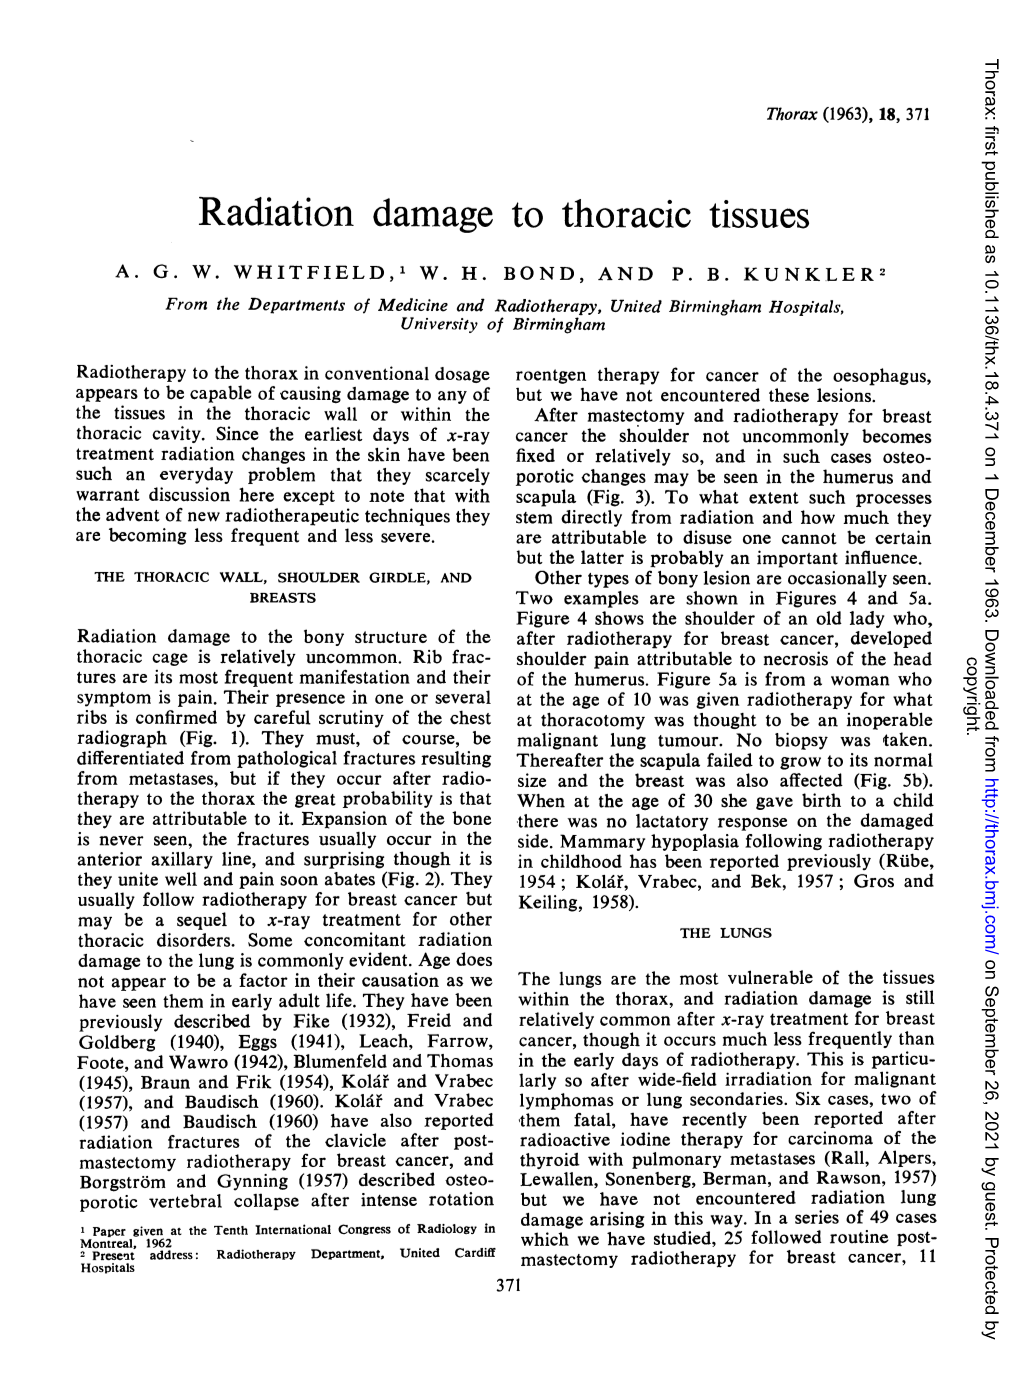 Radiation Damage to Thoracic Tissues